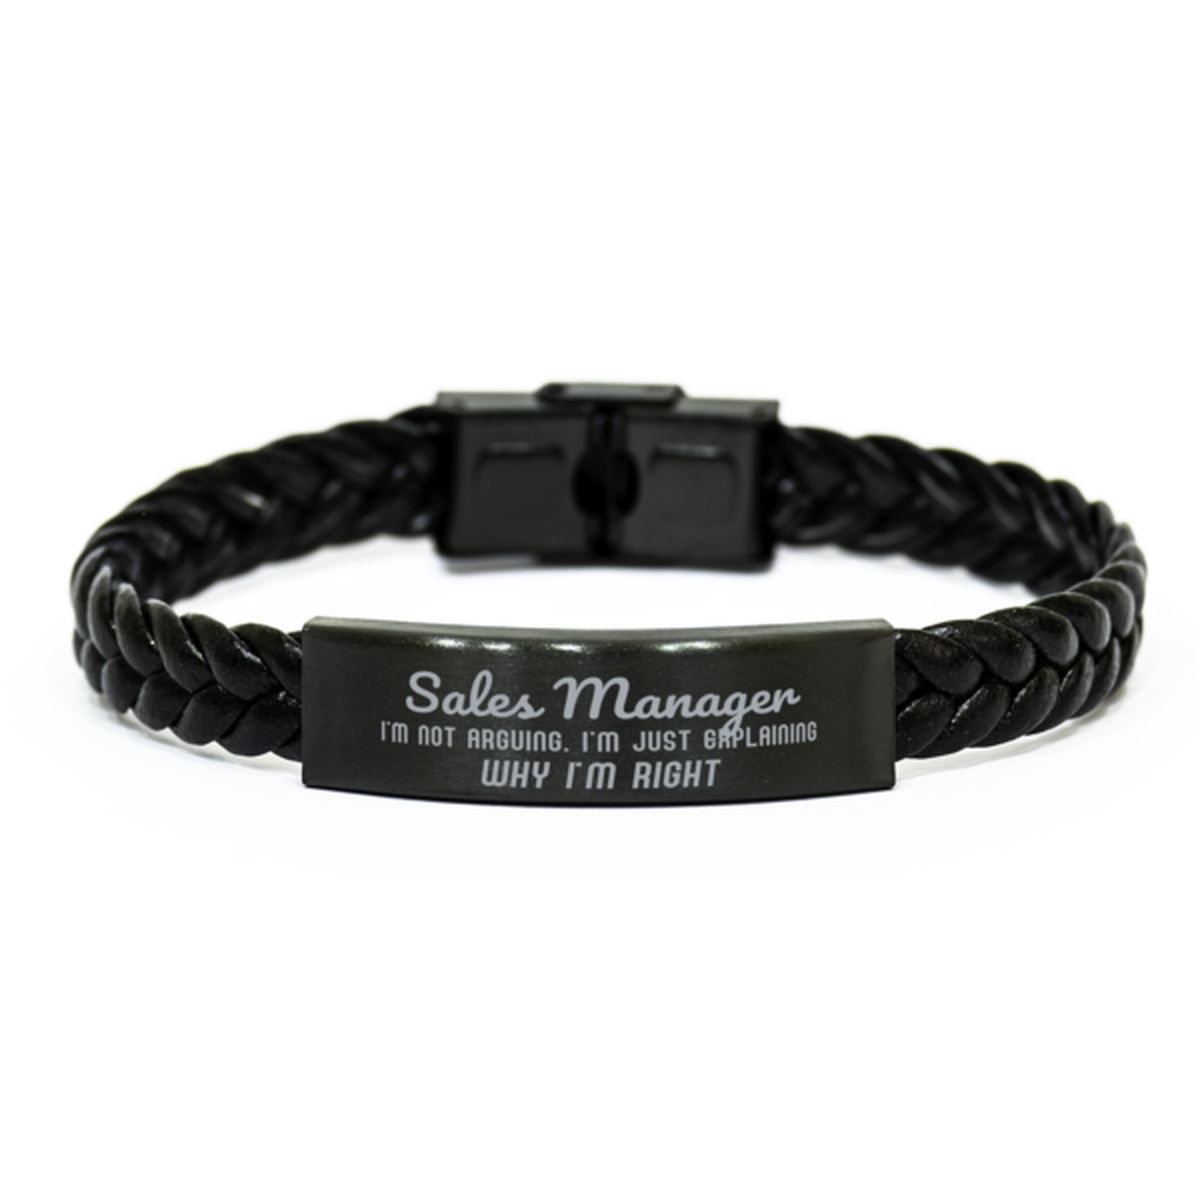 Sales Manager I'm not Arguing. I'm Just Explaining Why I'm RIGHT Braided Leather Bracelet, Graduation Birthday Christmas Sales Manager Gifts For Sales Manager Funny Saying Quote Present for Men Women Coworker